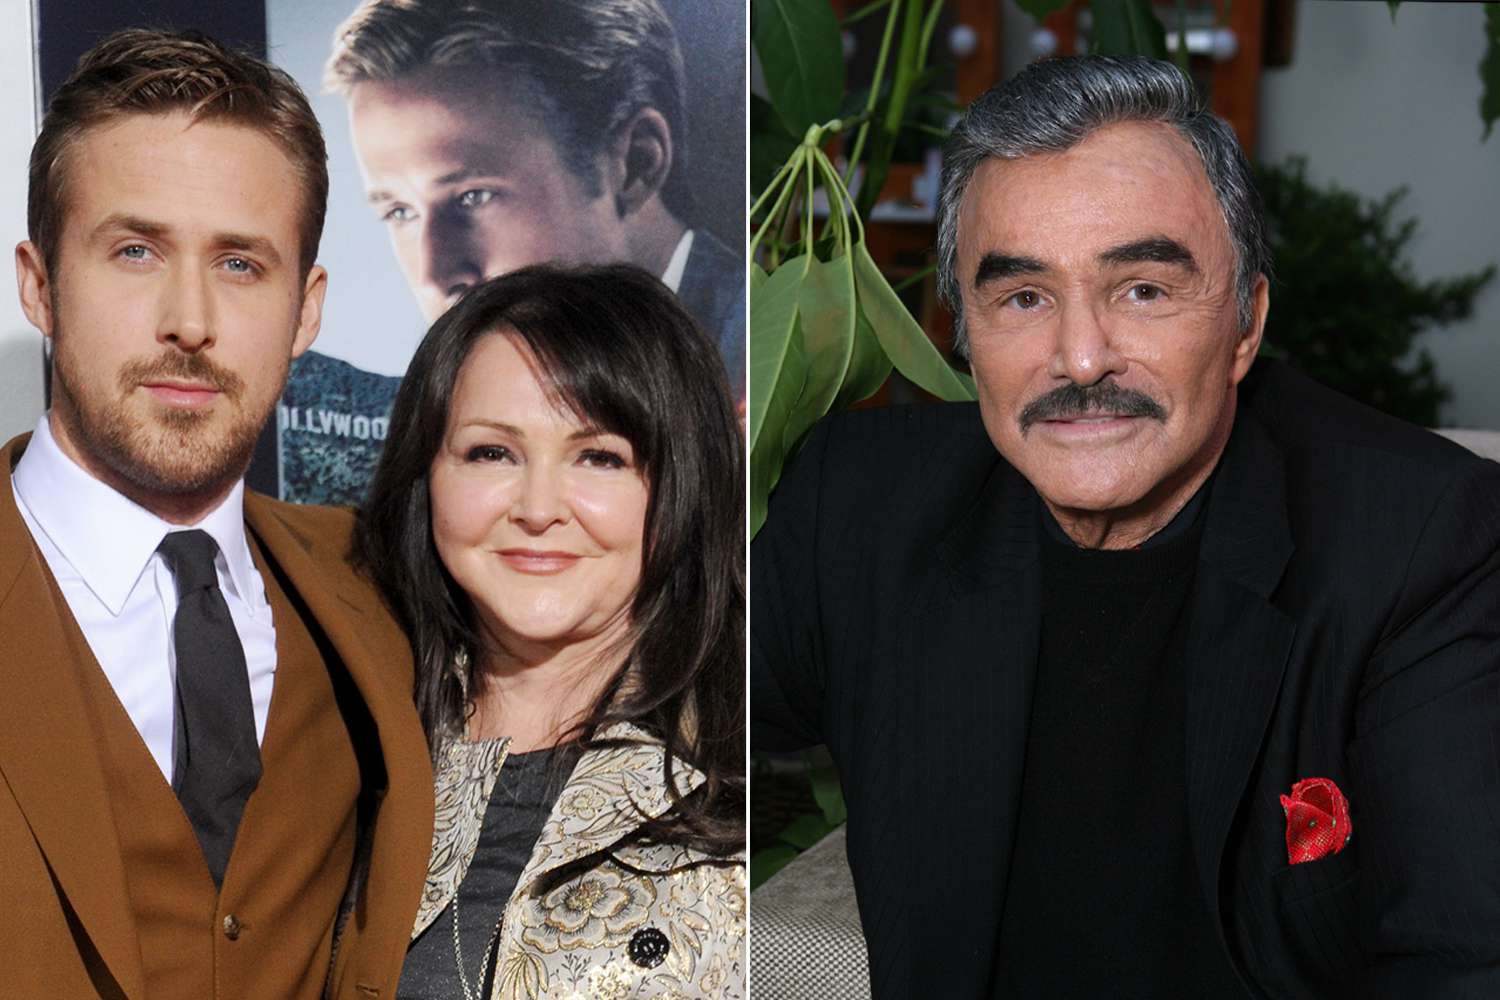 Ryan Gosling Reveals Burt Reynolds Had a Crush on His Mom: 'I Thought He Took a Shine to Me'